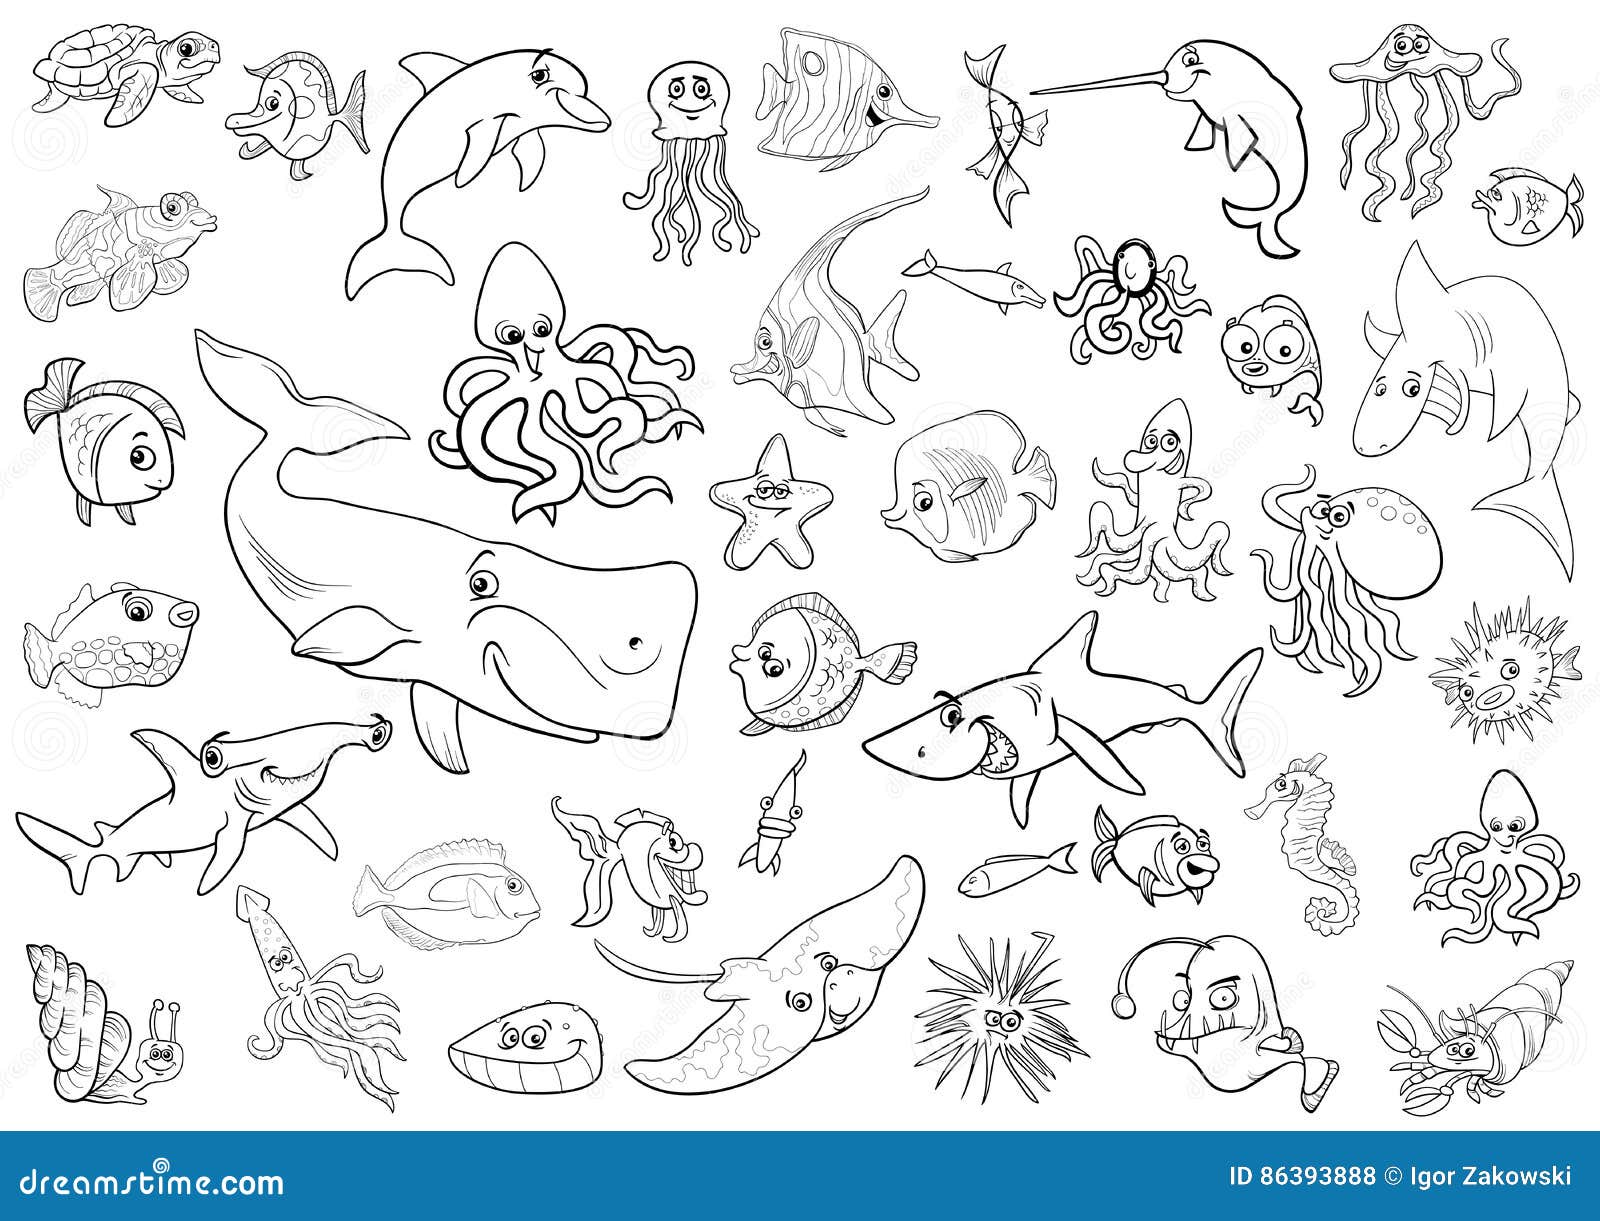 Sea Life Animals Coloring Page Stock Vector   Illustration of ...